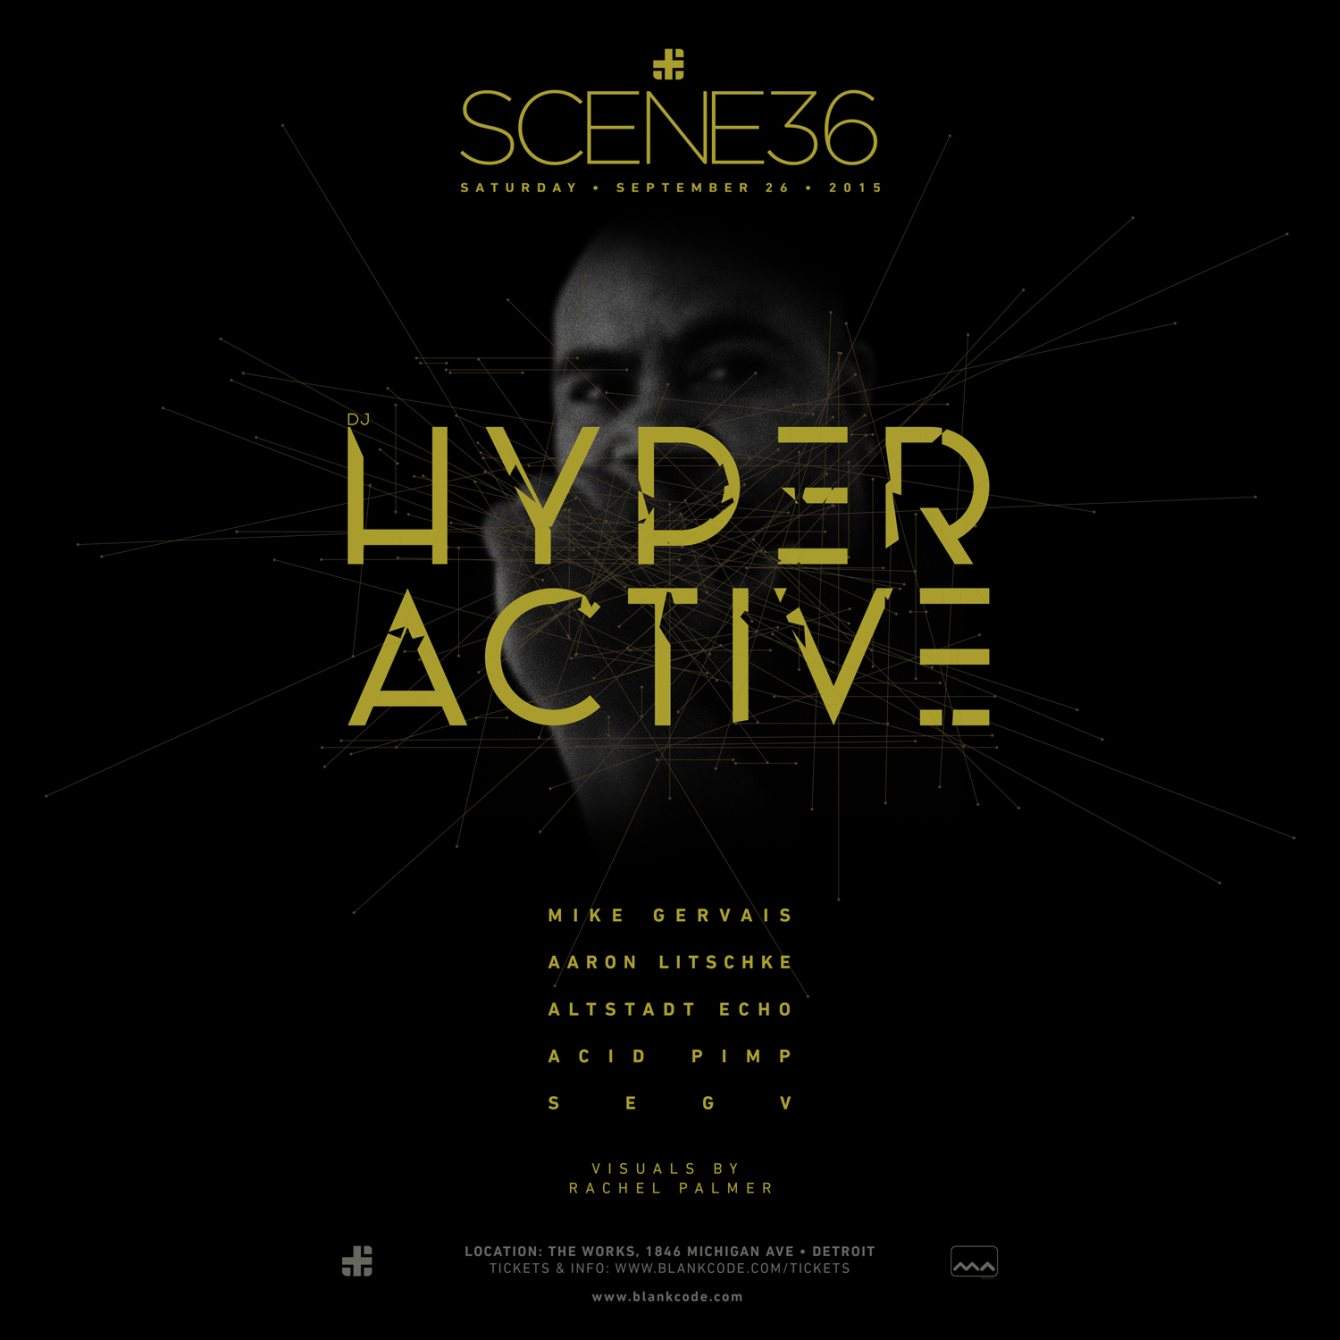 Scene 36 with DJ Hyperactive & Mike Gervais - フライヤー裏